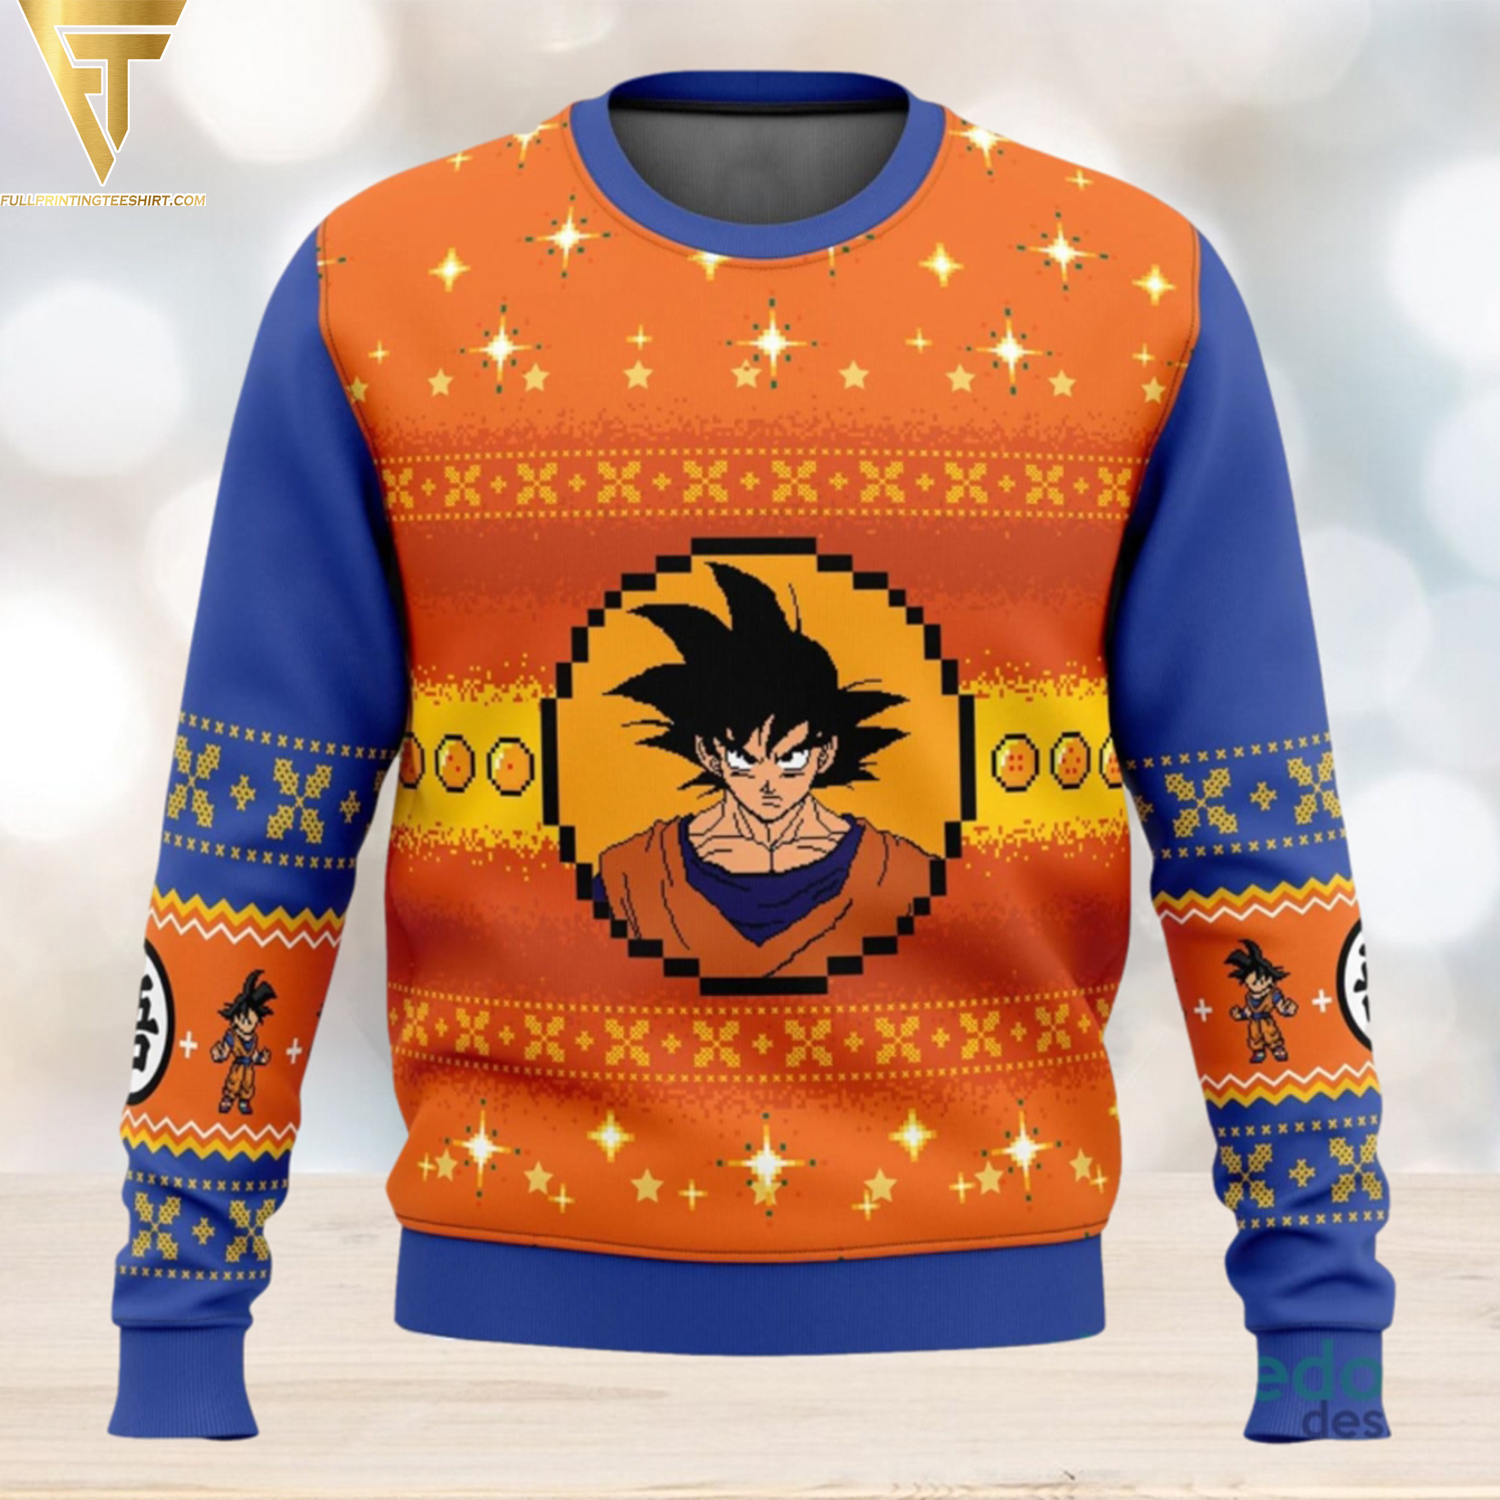 Unleash Your Inner Saiyan Spirit with the Dragon Ball Z Sweater - The Ultimate Christmas Gift!